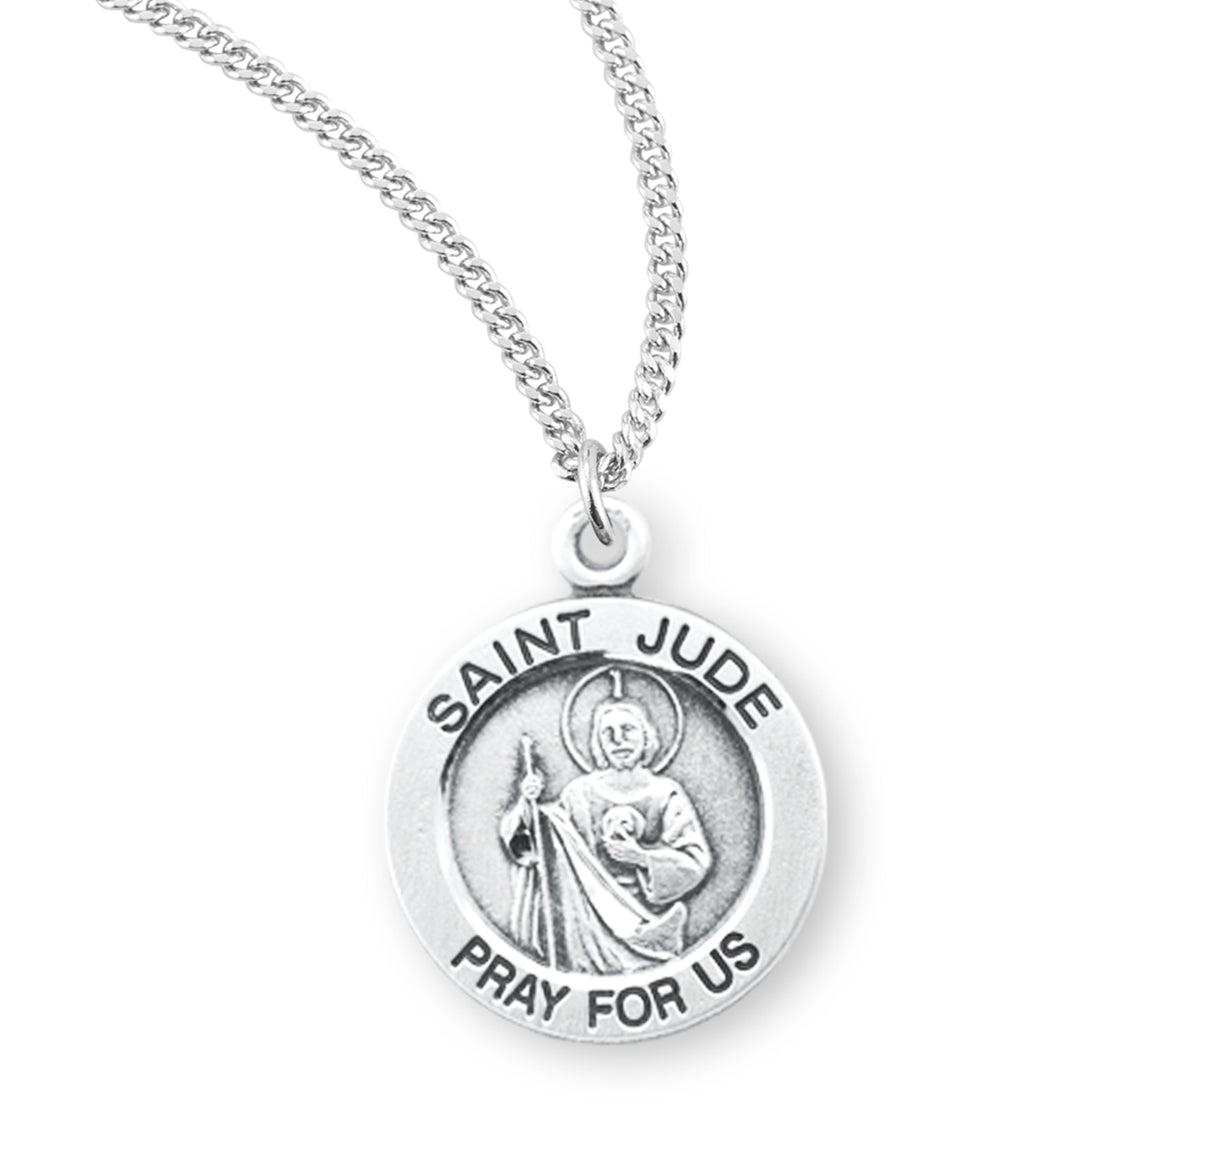 Patron Saint Jude Round Sterling Silver Medal